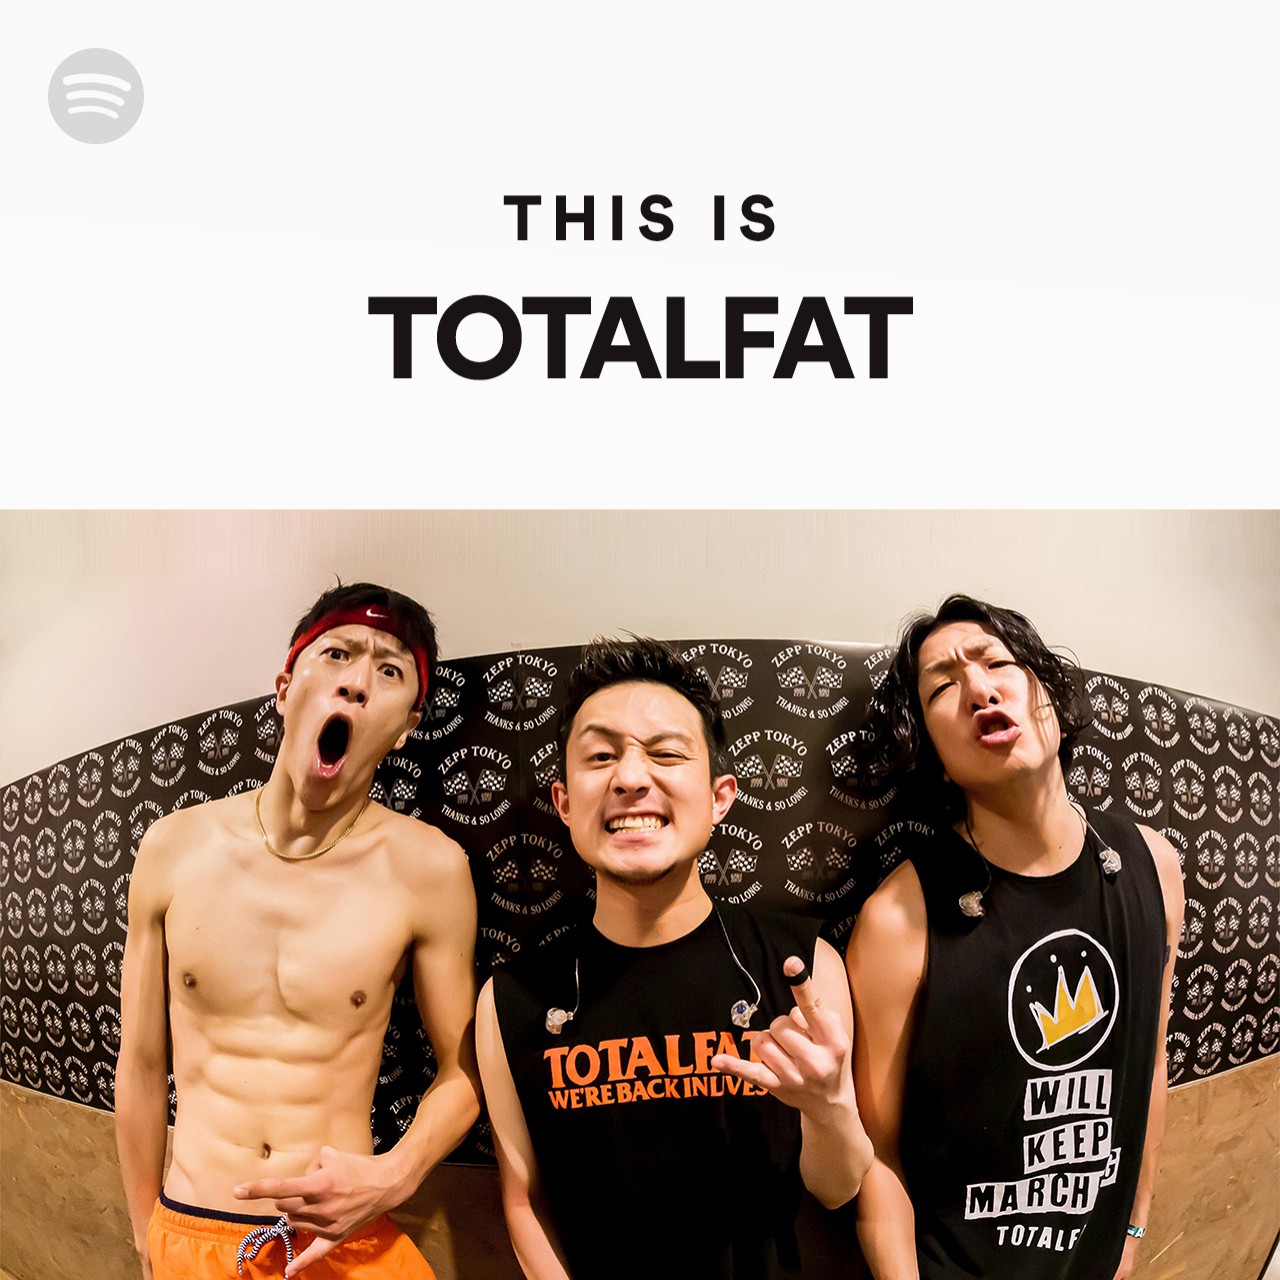 This is TOTALFAT